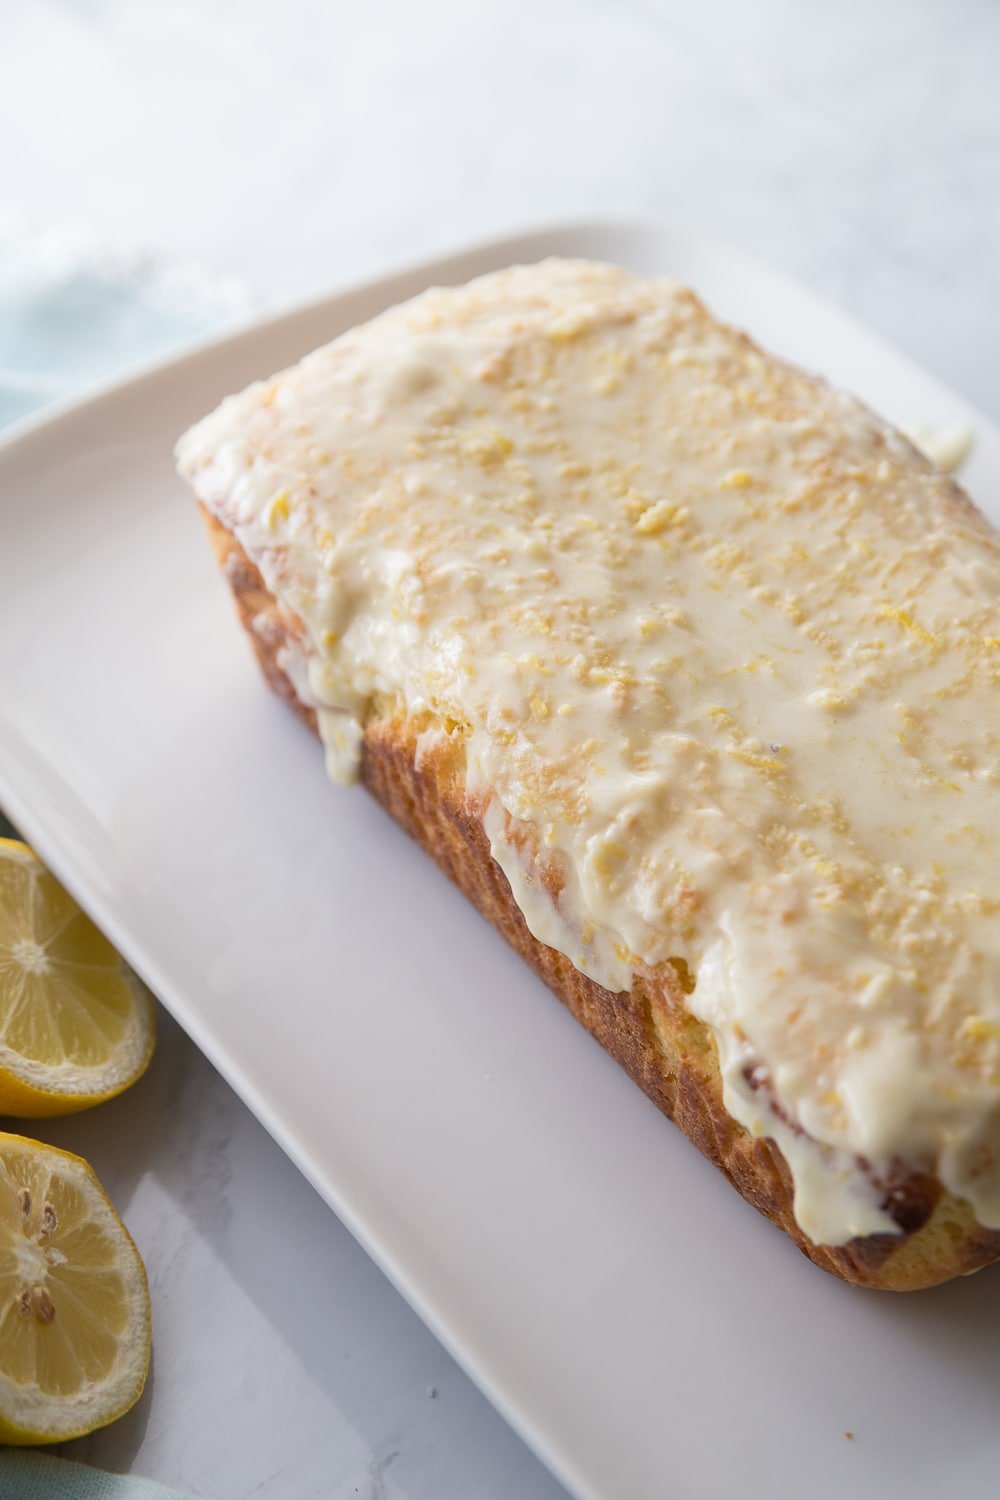 This Keto Lemon Bread recipe reminds me of Starbucks glazed lemon bread, but with a fraction of the carbs. #keto #lowcarb 